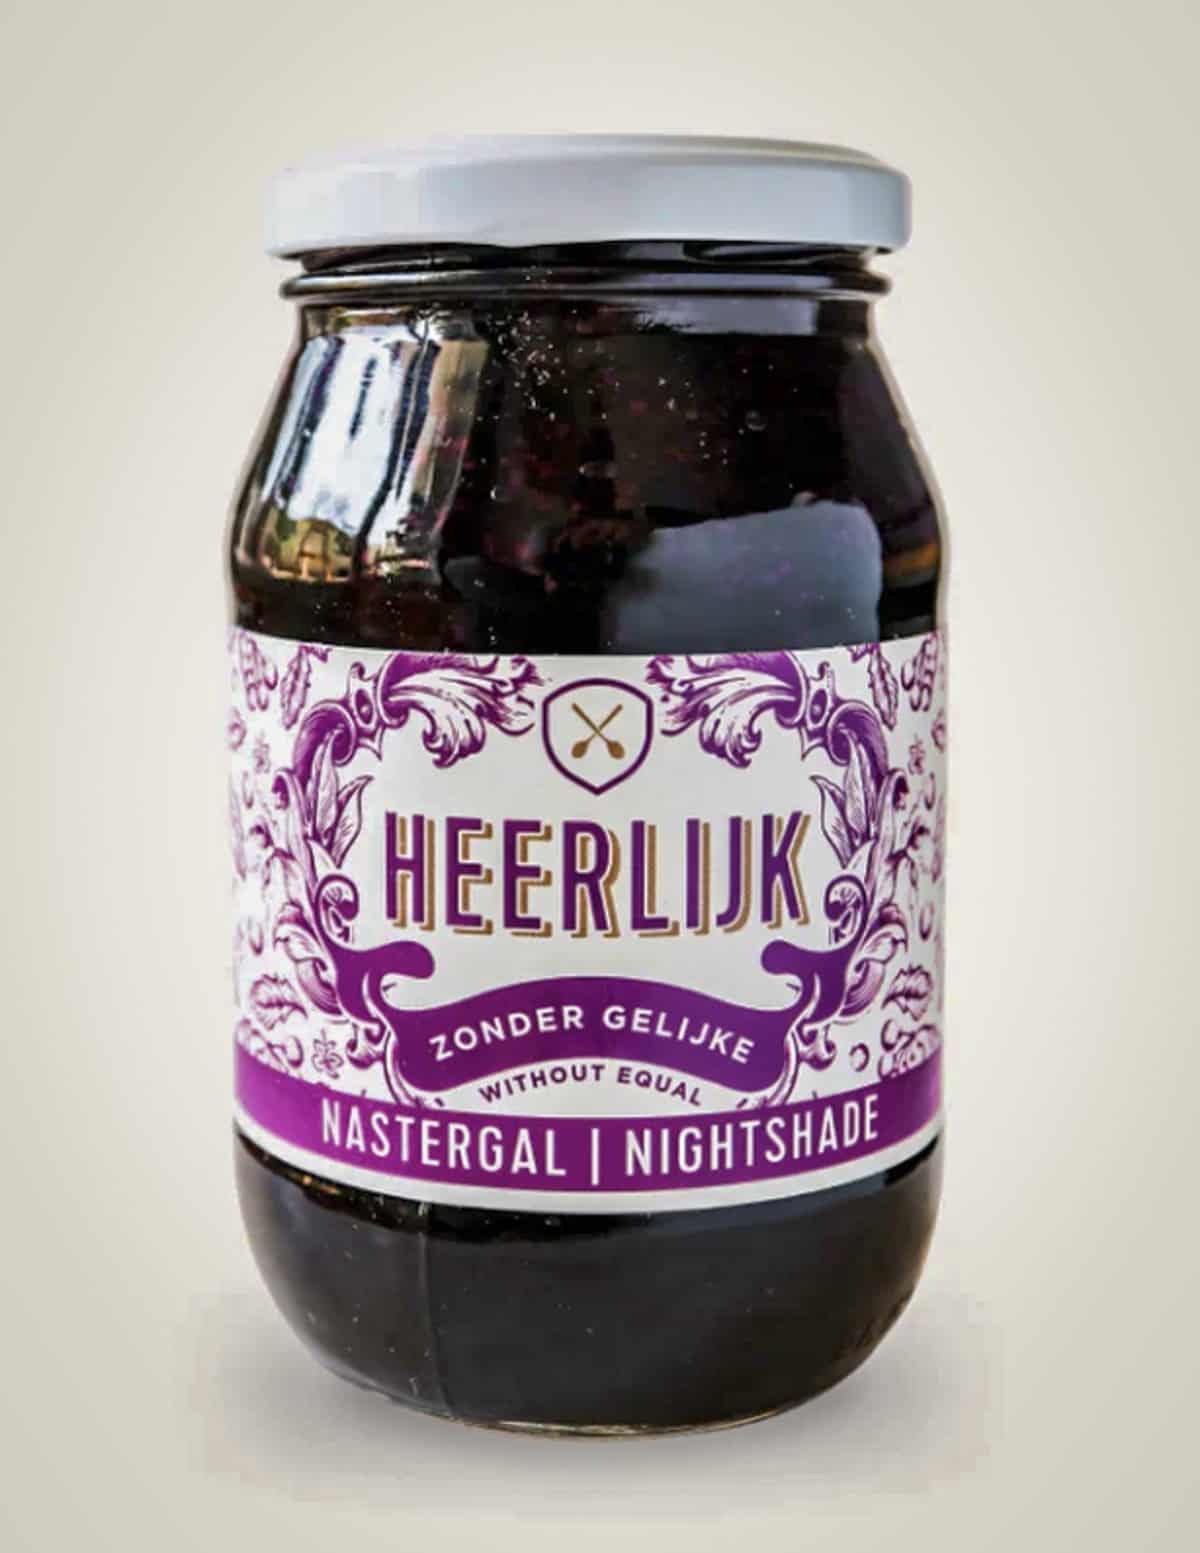 A jar of black nightshade jam from South Africa. 